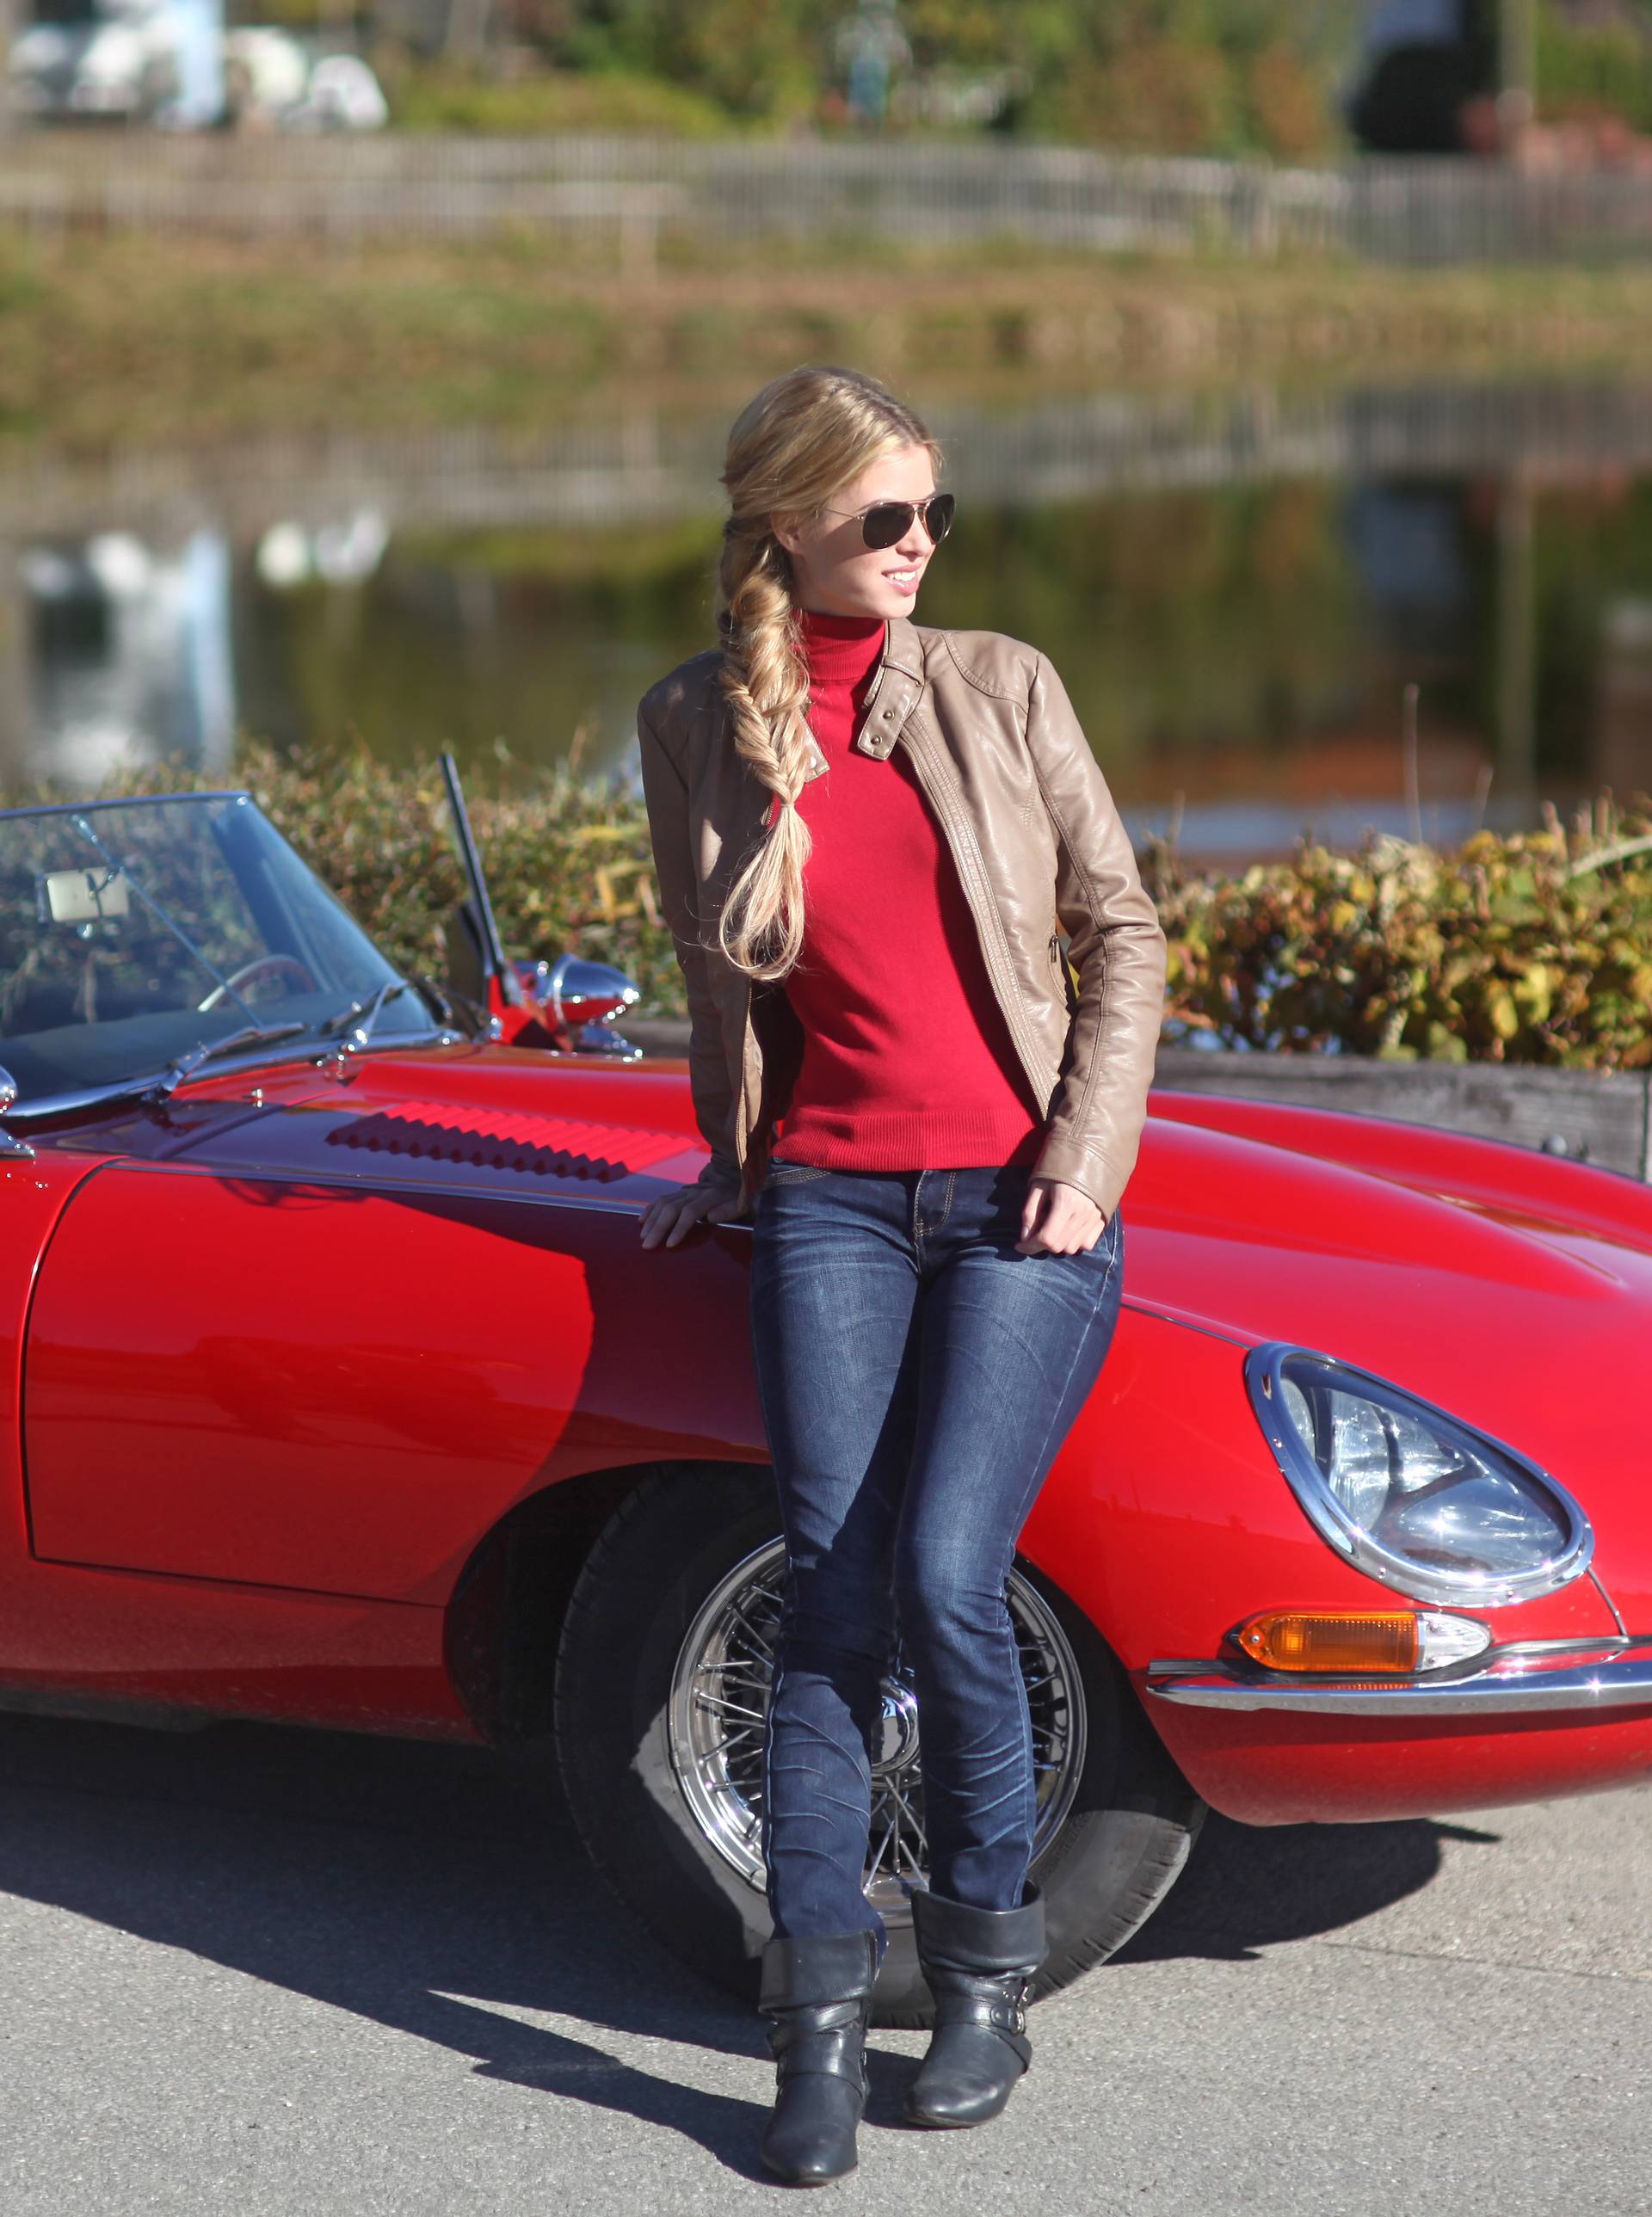 Mature man and young woman leaning against red sports car